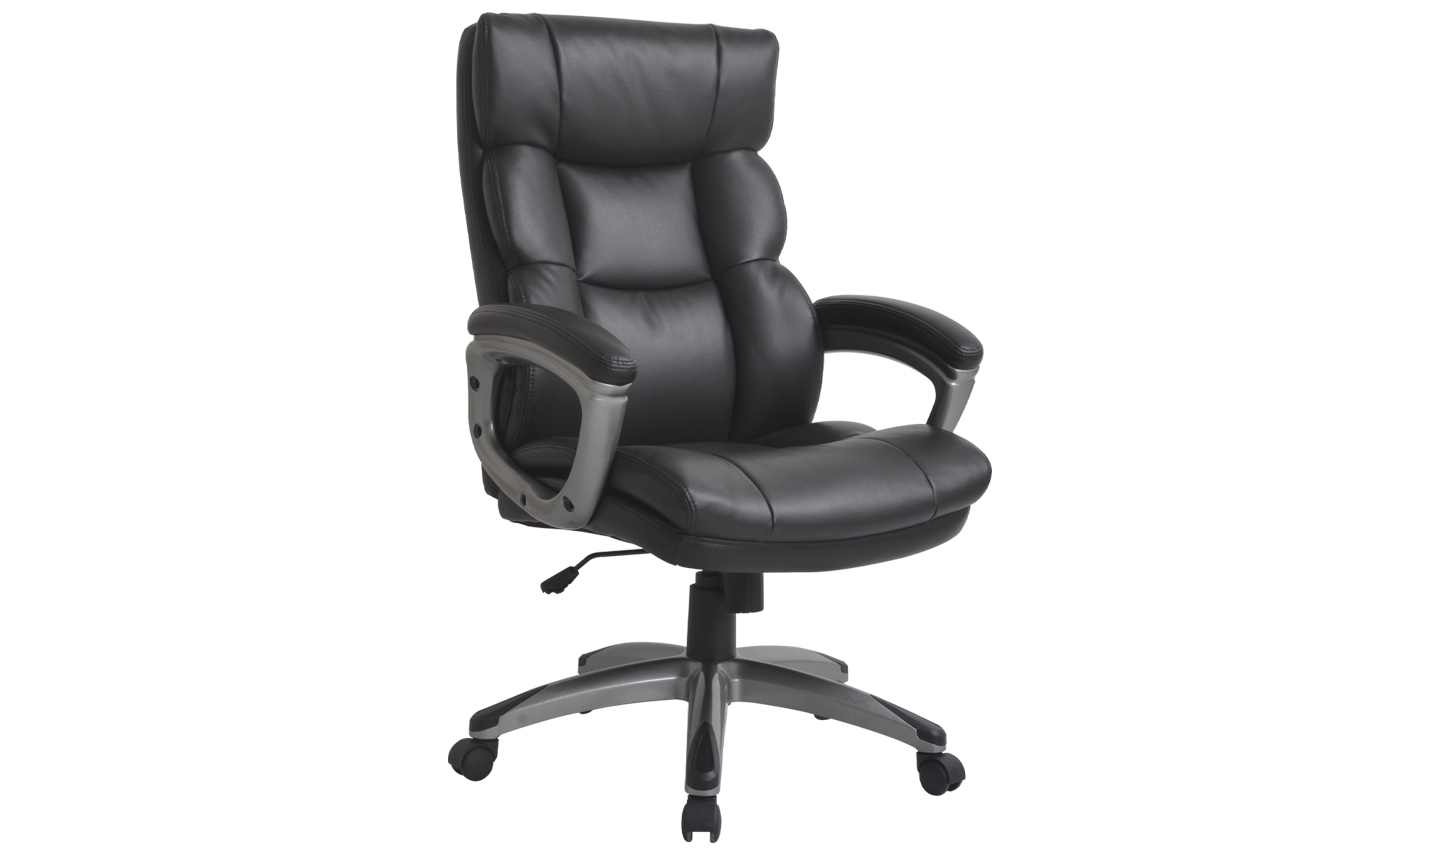 Executive Office Chair Dark Brown, Brown Leather Office Chairs Ireland